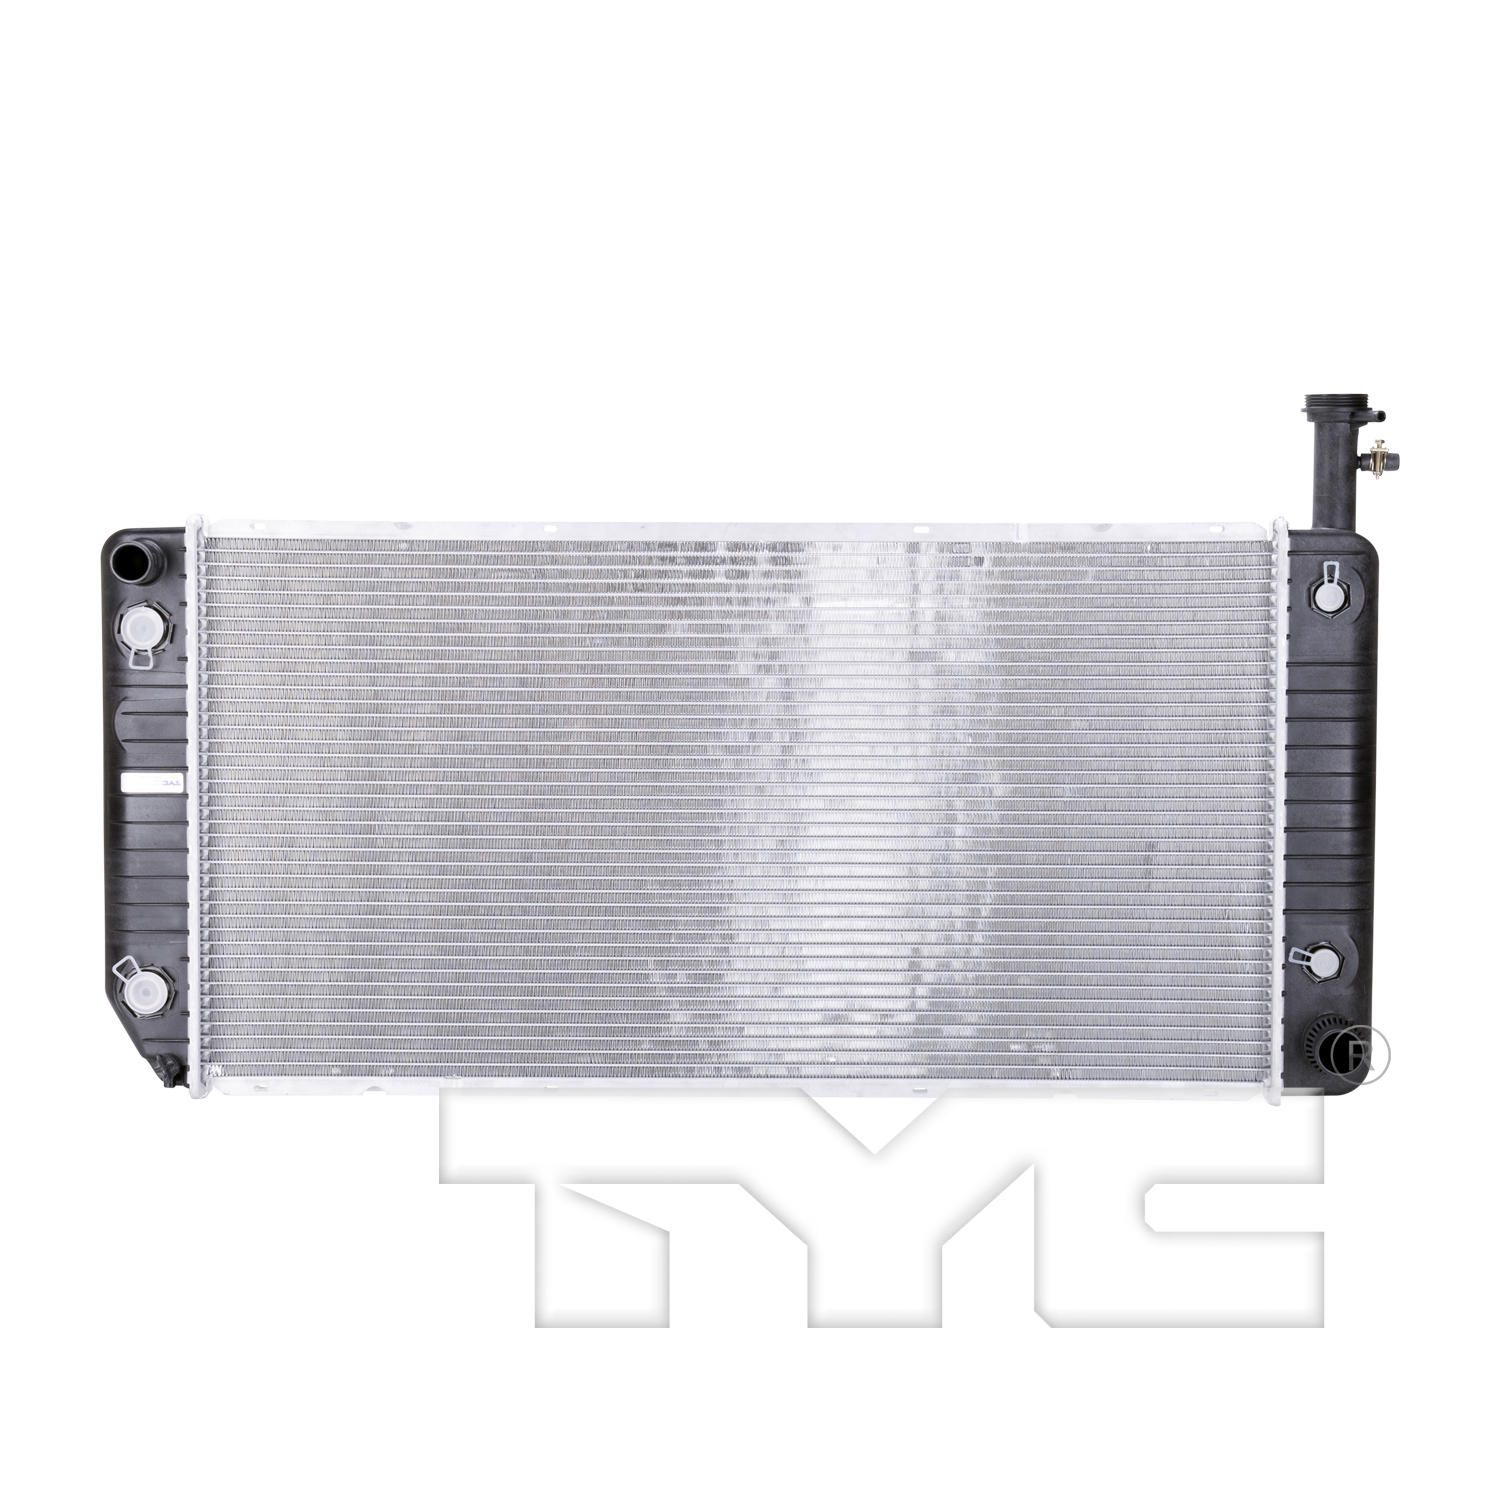 Aftermarket RADIATORS for CHEVROLET - EXPRESS 1500, EXPRESS 1500,05-08,Radiator assembly